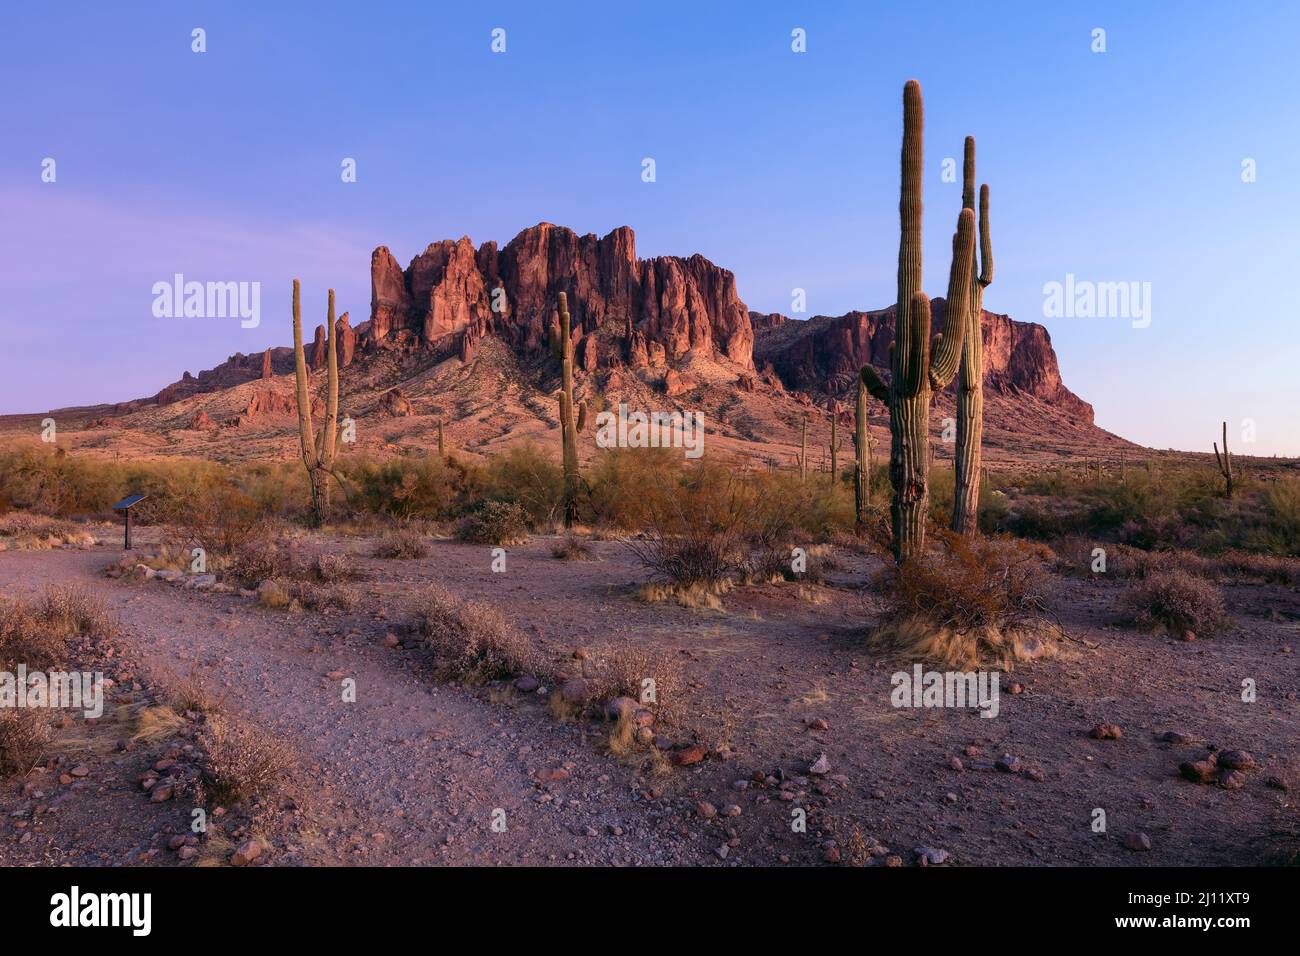 Scenic view of the Superstition Mountains, Arizona at Lost Dutchman State Park Stock Photo